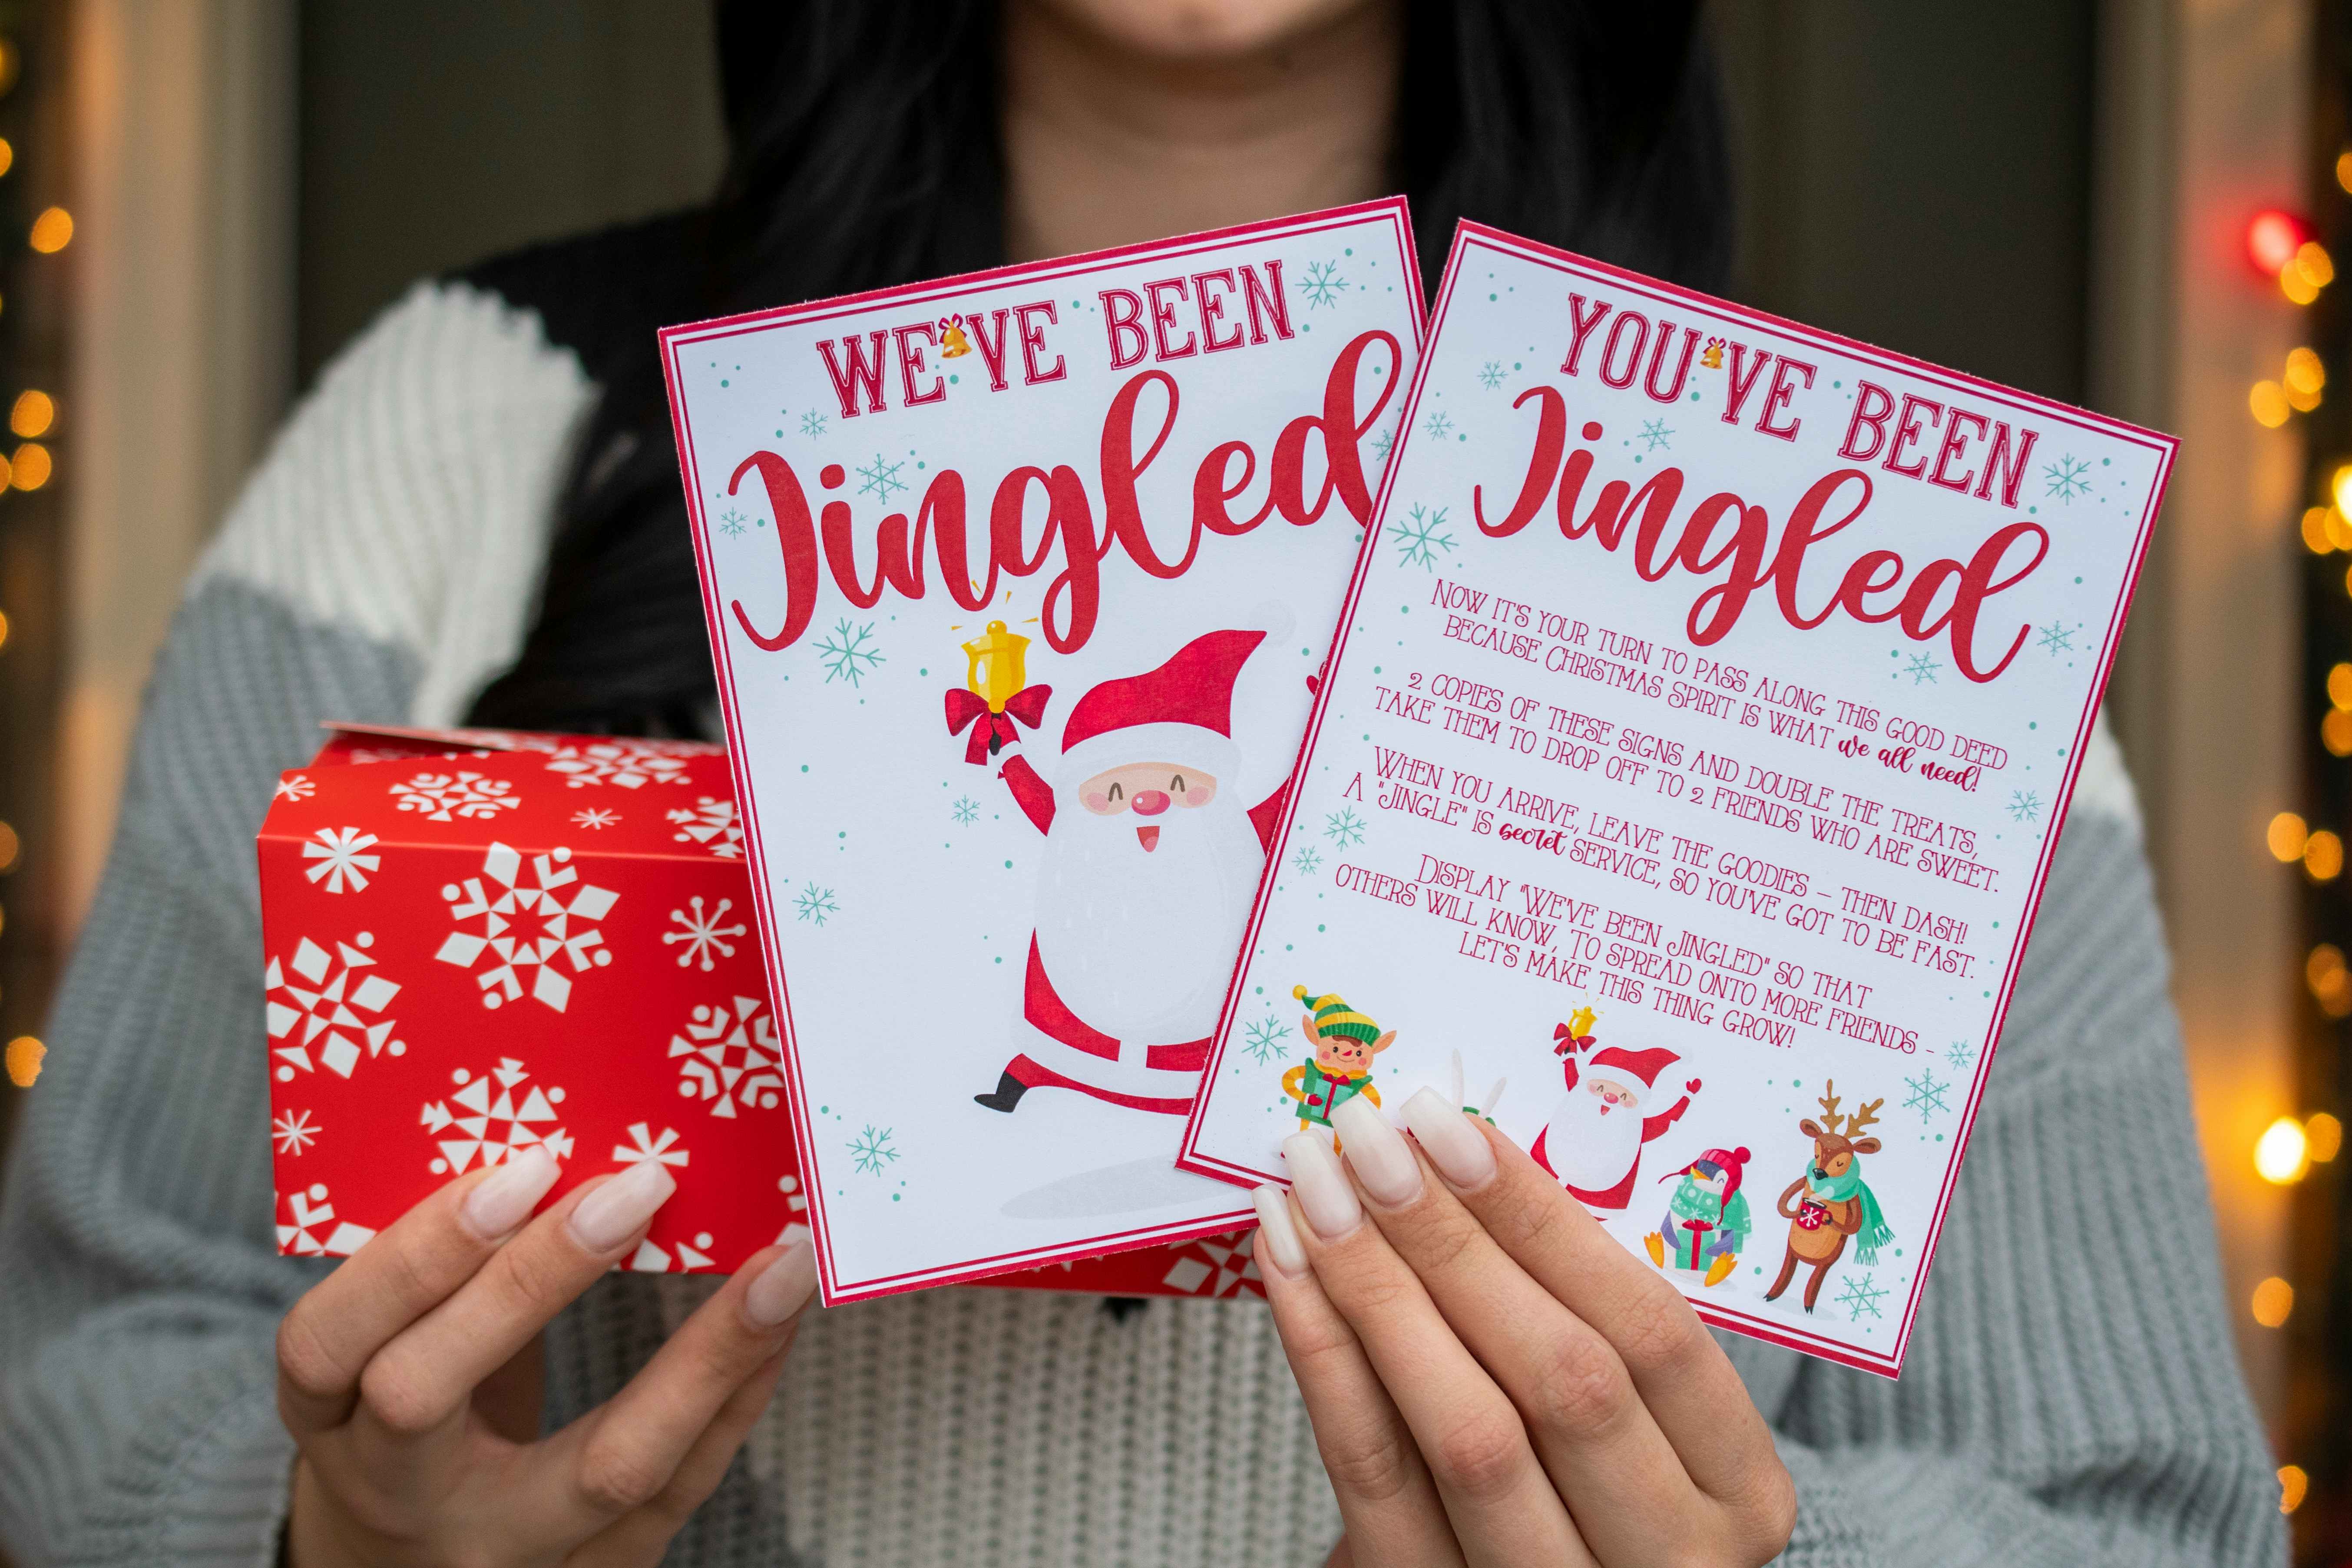 Someone holding a wrapped present and two cards, one saying "we've been jingled" and the other saying, "you've been jingled" with an explanation of the game